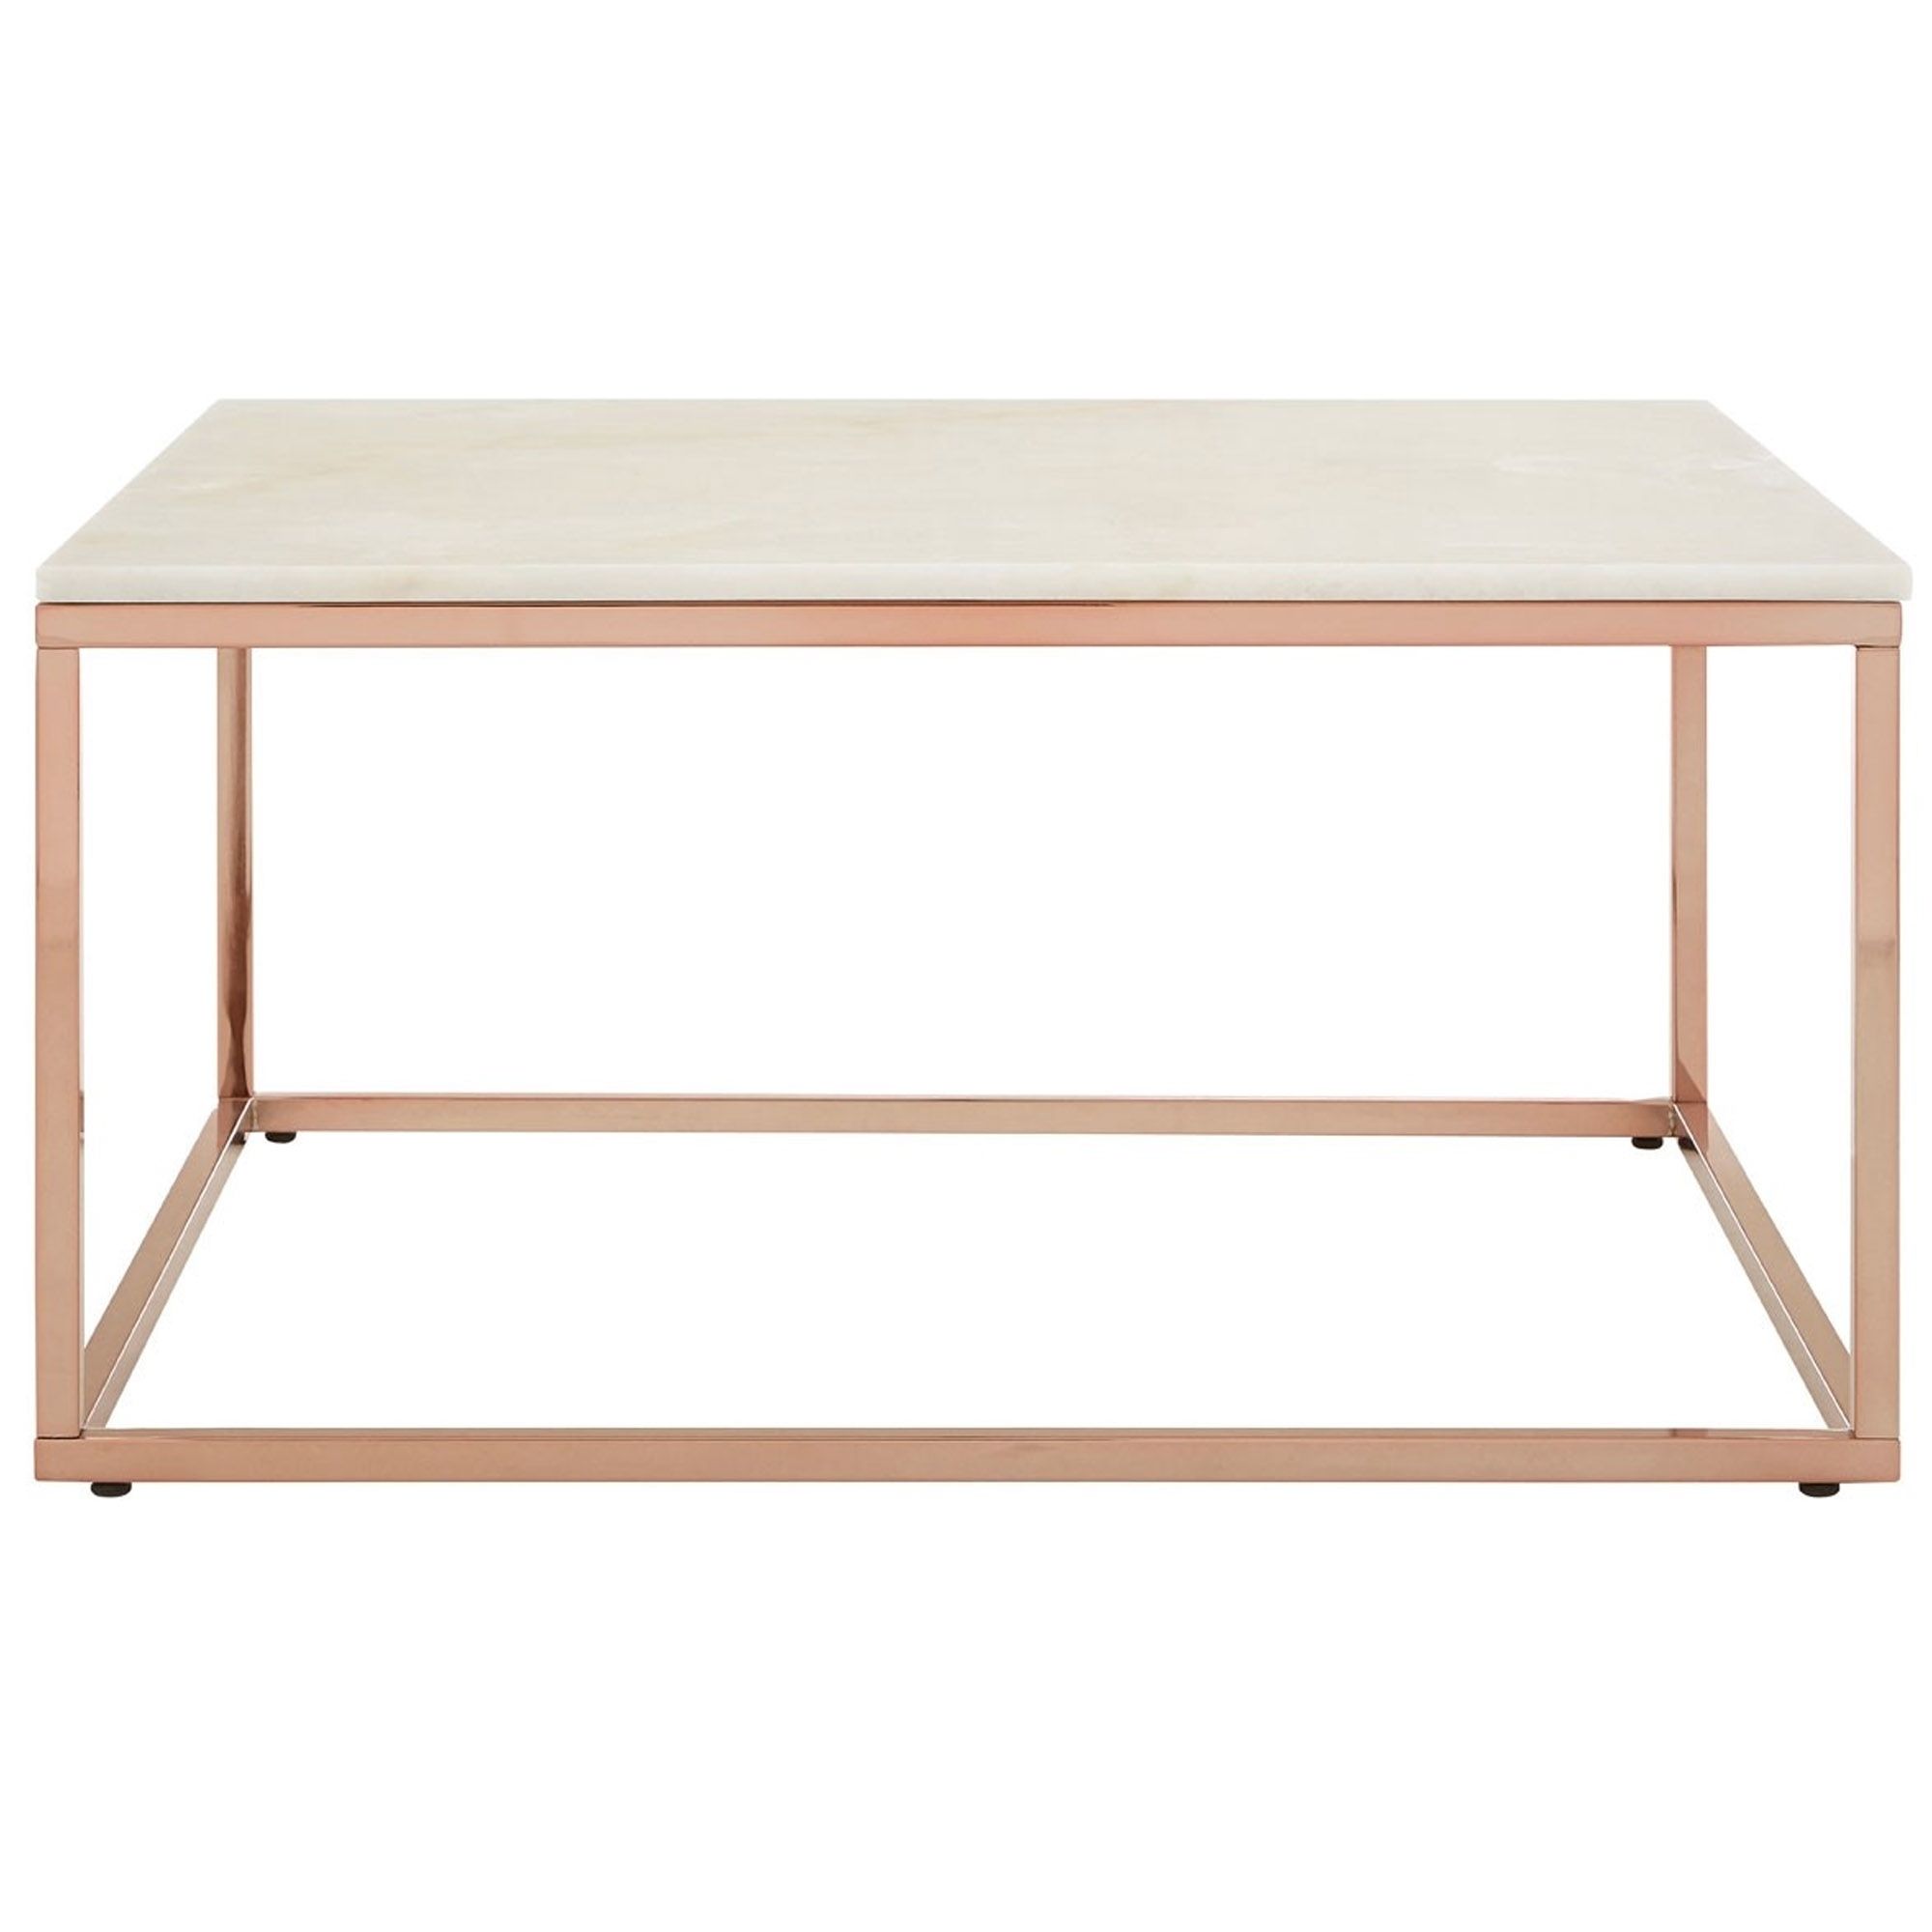 Rose Gold Allure Square Coffee Table | Contemporary Lounge Furniture With Regard To Rose Gold Coffee Tables (View 13 of 15)